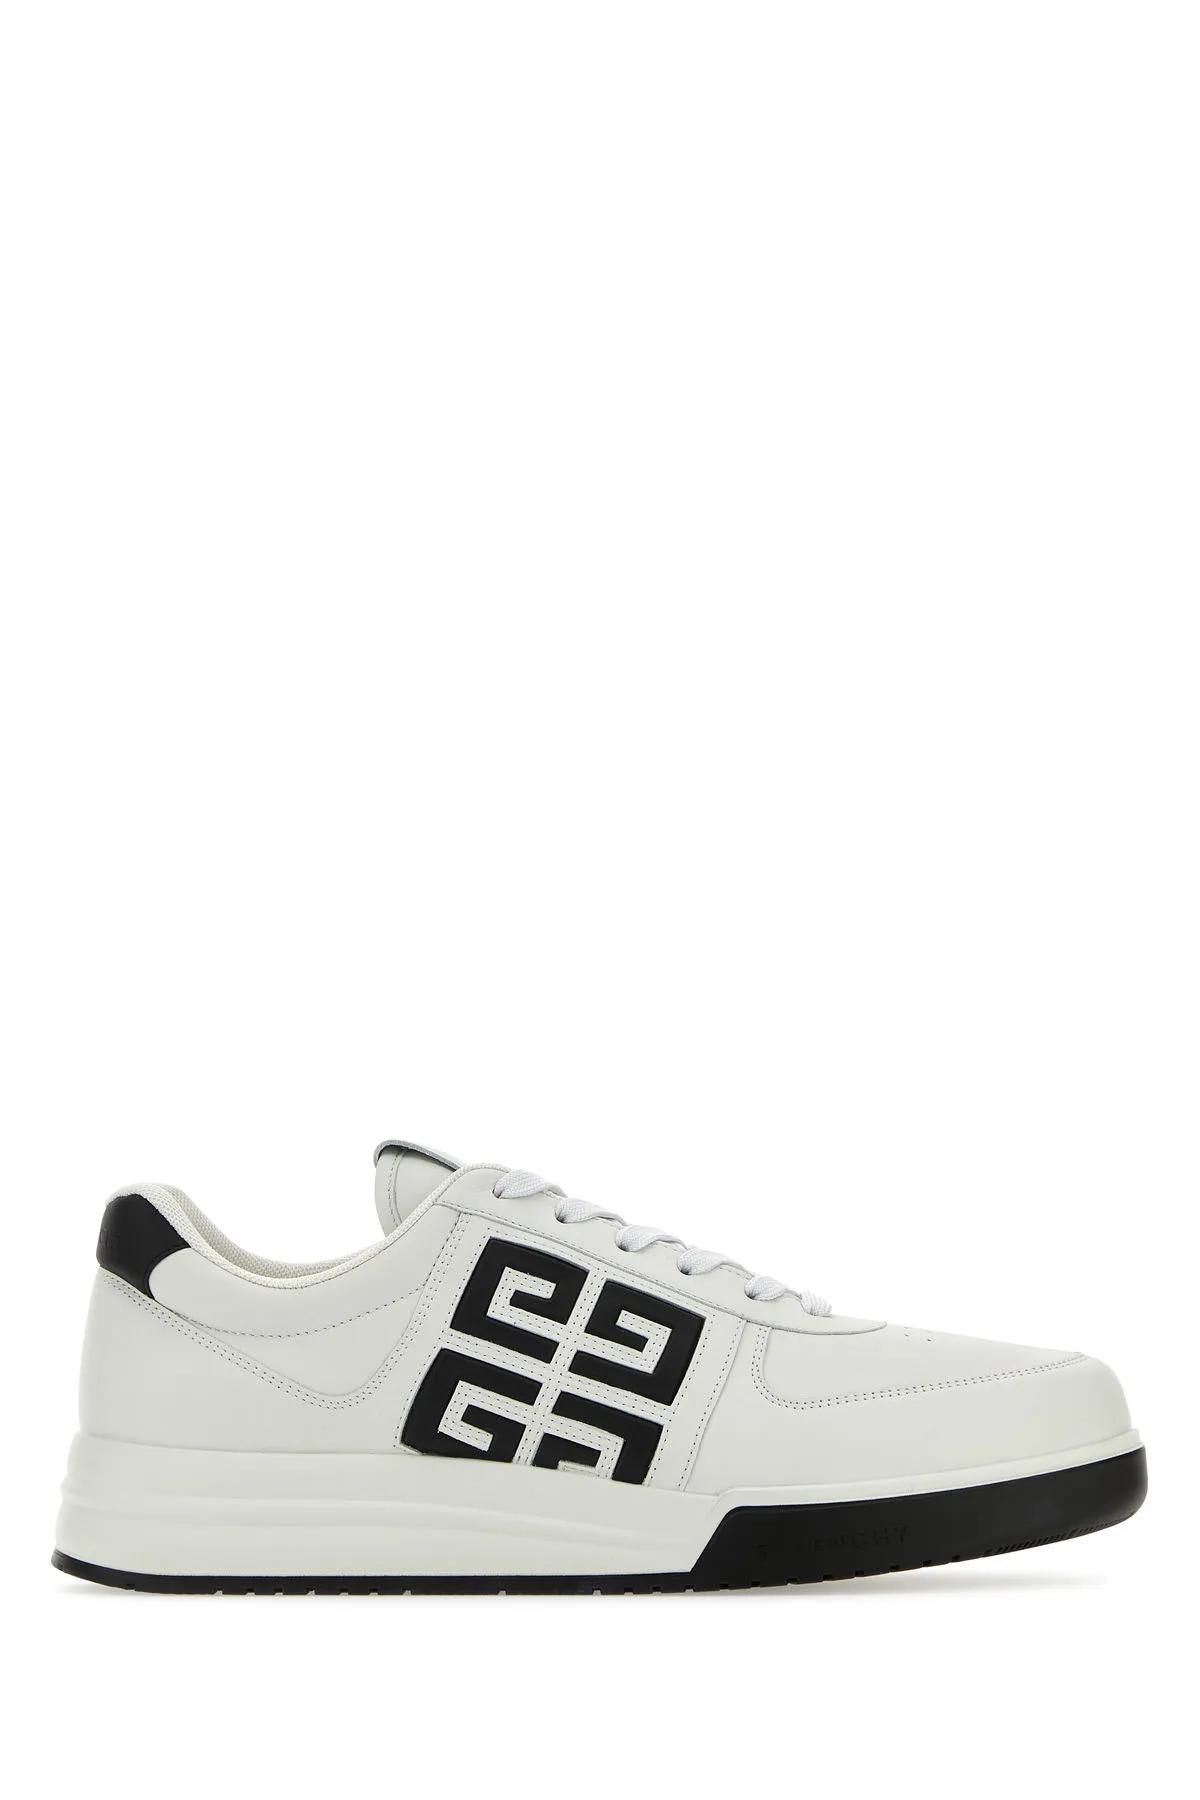 Shop Givenchy Two-tone Leather G4 Sneakers In White